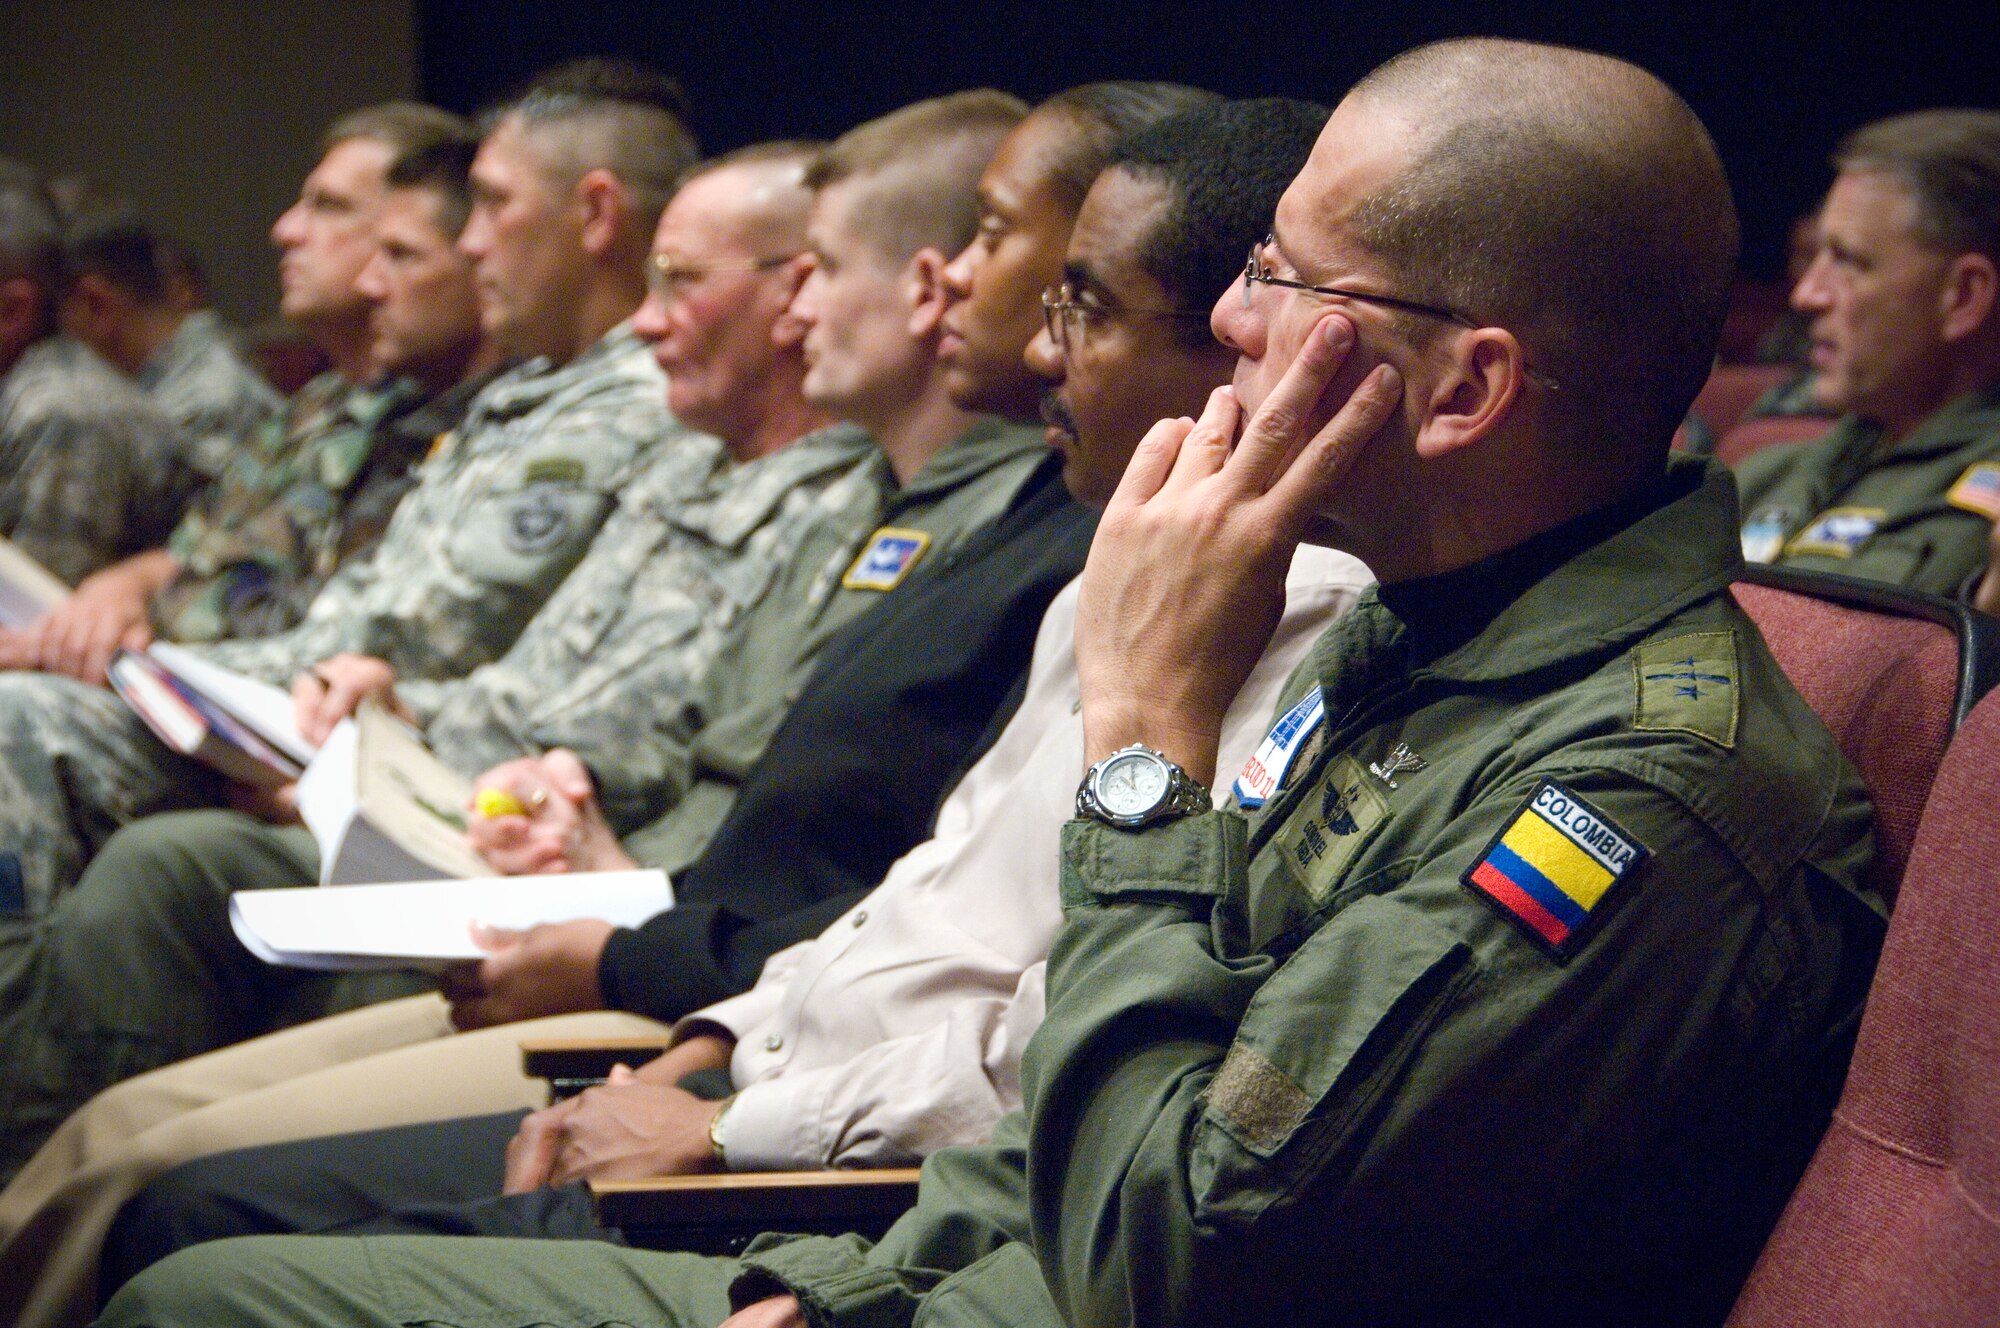 Air War College students listen as Adm. Thad Allen, commandant of the
U.S. Coast Guard, speaks about Homeland Security on April 9. The admiral's
address was part of the Distinguished Lecture Series that Air War College
provides its students in order to educate them on leadership. Under the
program, leaders from across a wide range of disciplines, including
diplomats and scholars, speak on a regular basis to Air War College classes.
 (U.S. Air Force photo by Melanie Rodgers Cox)